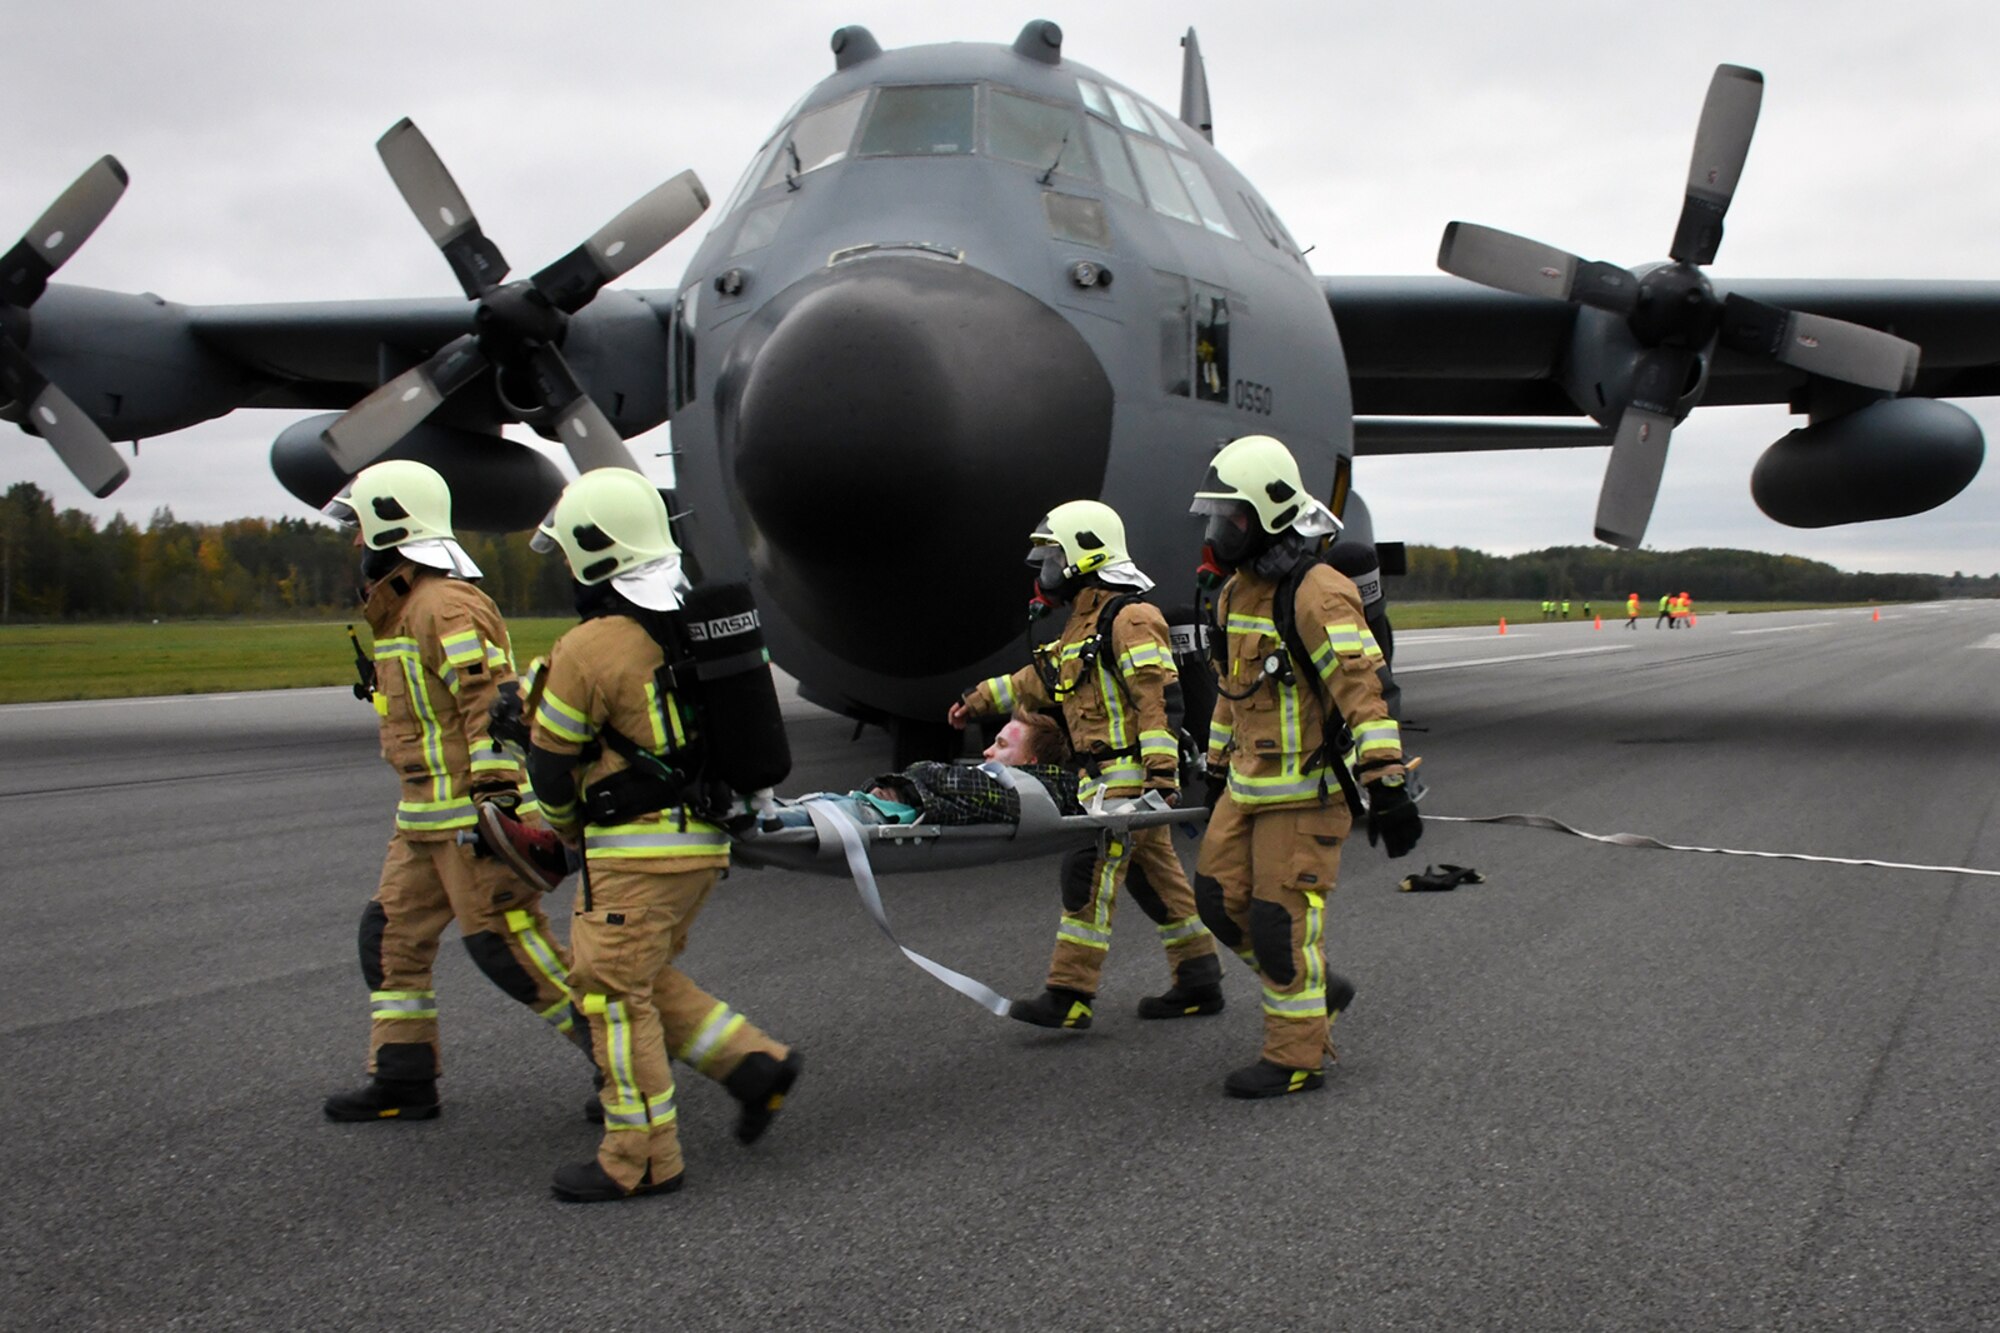 Latvian fire and rescue emergency responders evacuate an exercise participant from a C-130H from Dobbins Air Reserve Base, Ga., positioned on the runway in a simulated crash at Lielvarde Air Base, Latvia, during Sky Fist, Oct. 6, 2016. Sky Fist was a bilateral aircraft mishap training exercise designed to strengthen the partnership between the U.S. and Latvia. (U.S. Air Force photo by Staff Sgt. Alan Abernethy)